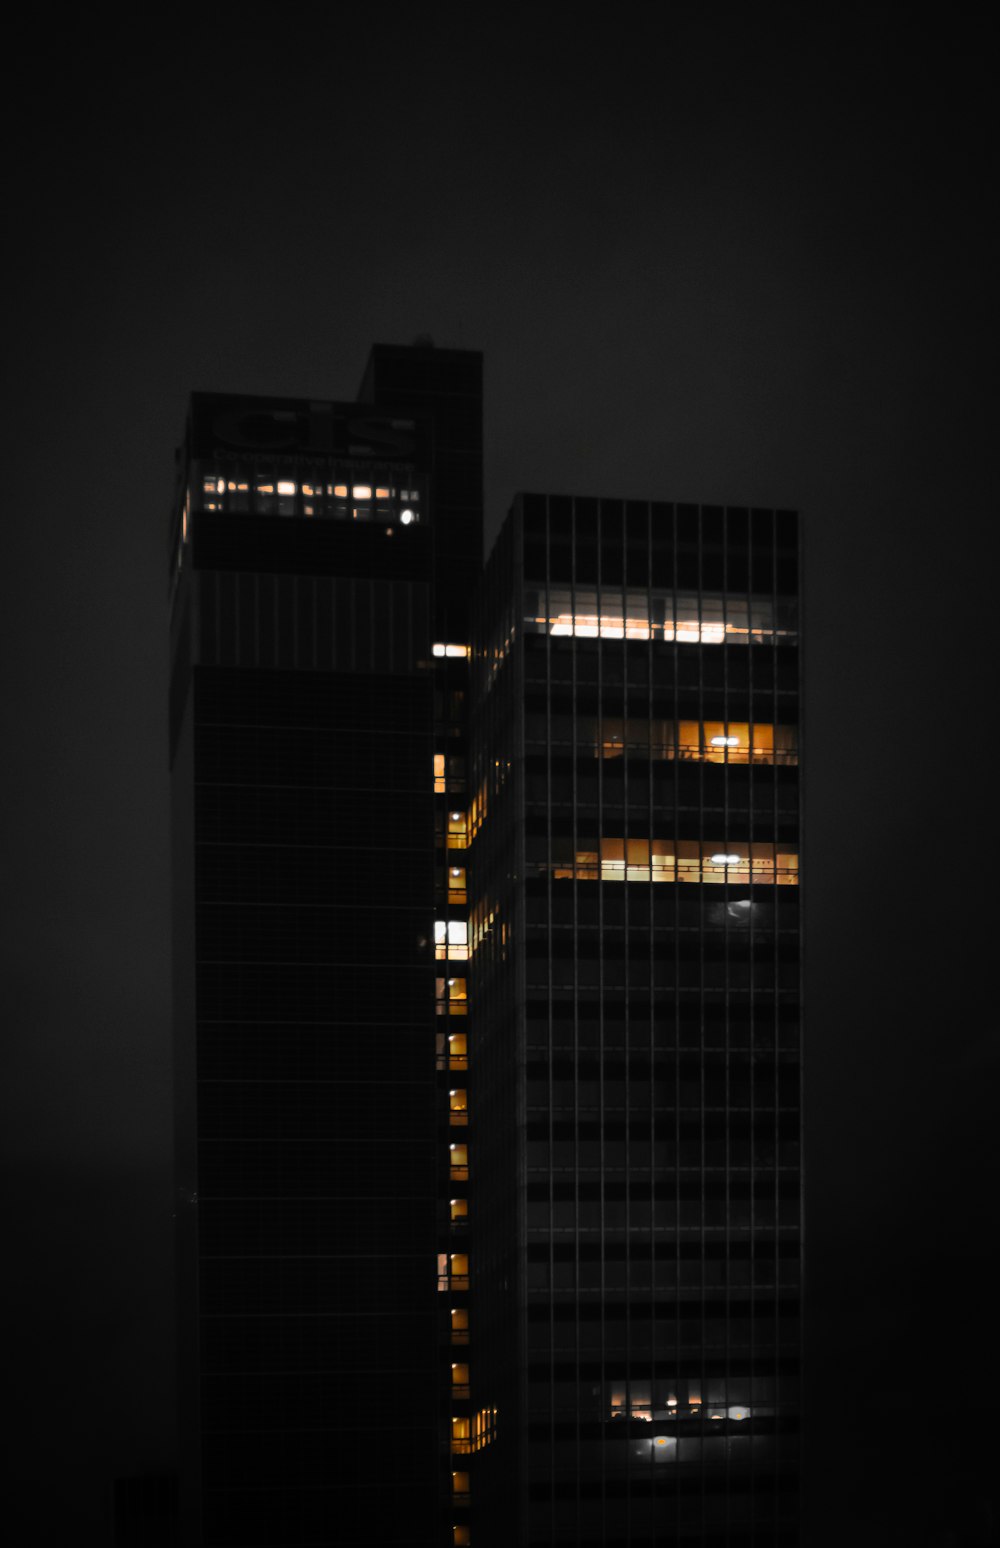 lighted buildings during nighttime